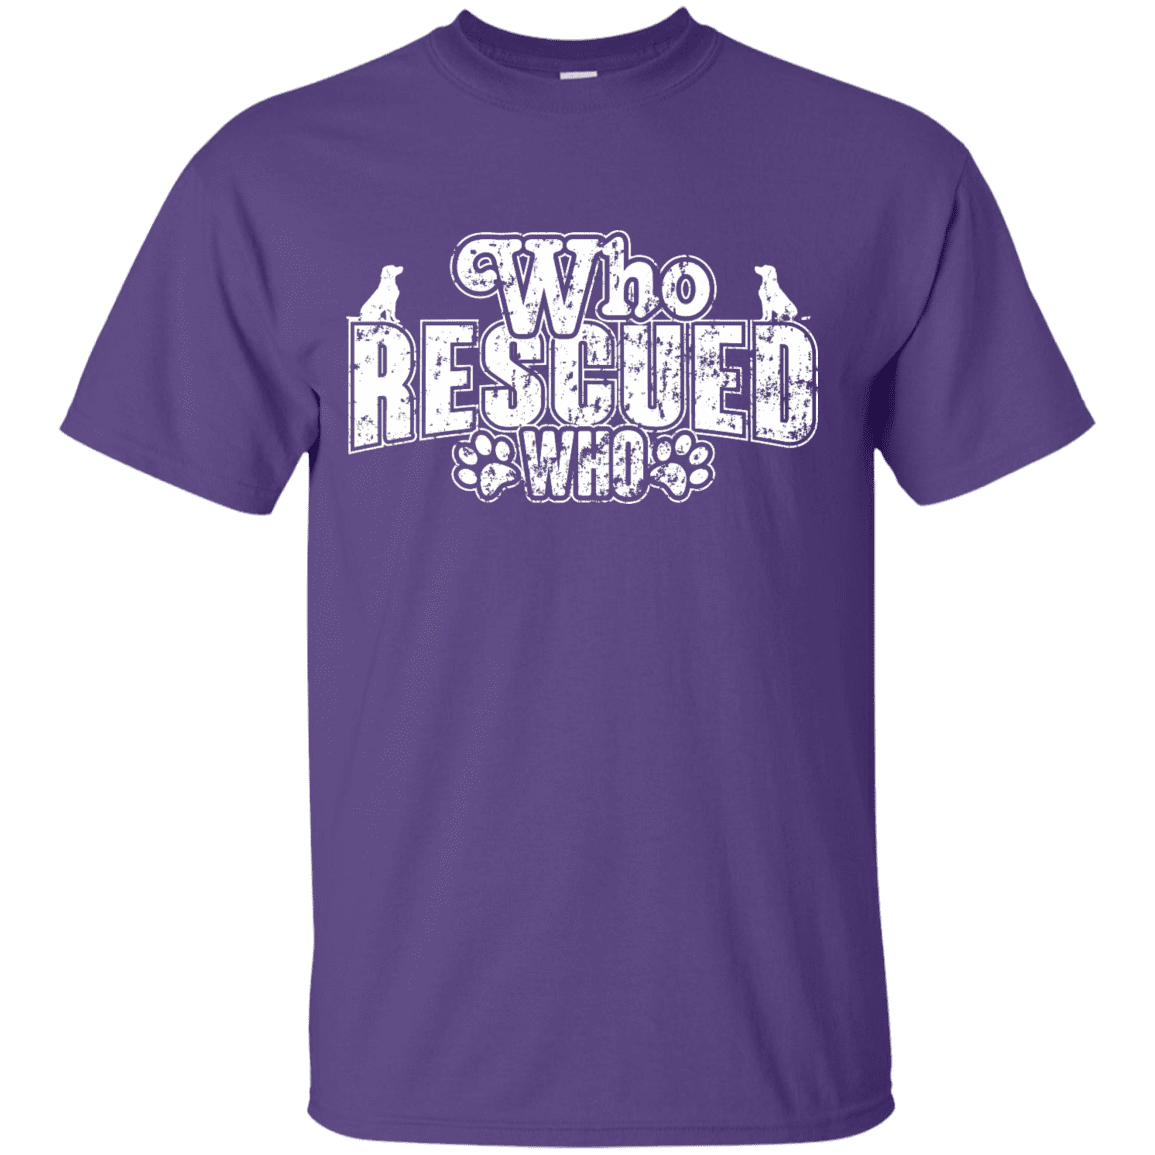 Who Rescued Who - T Shirt.